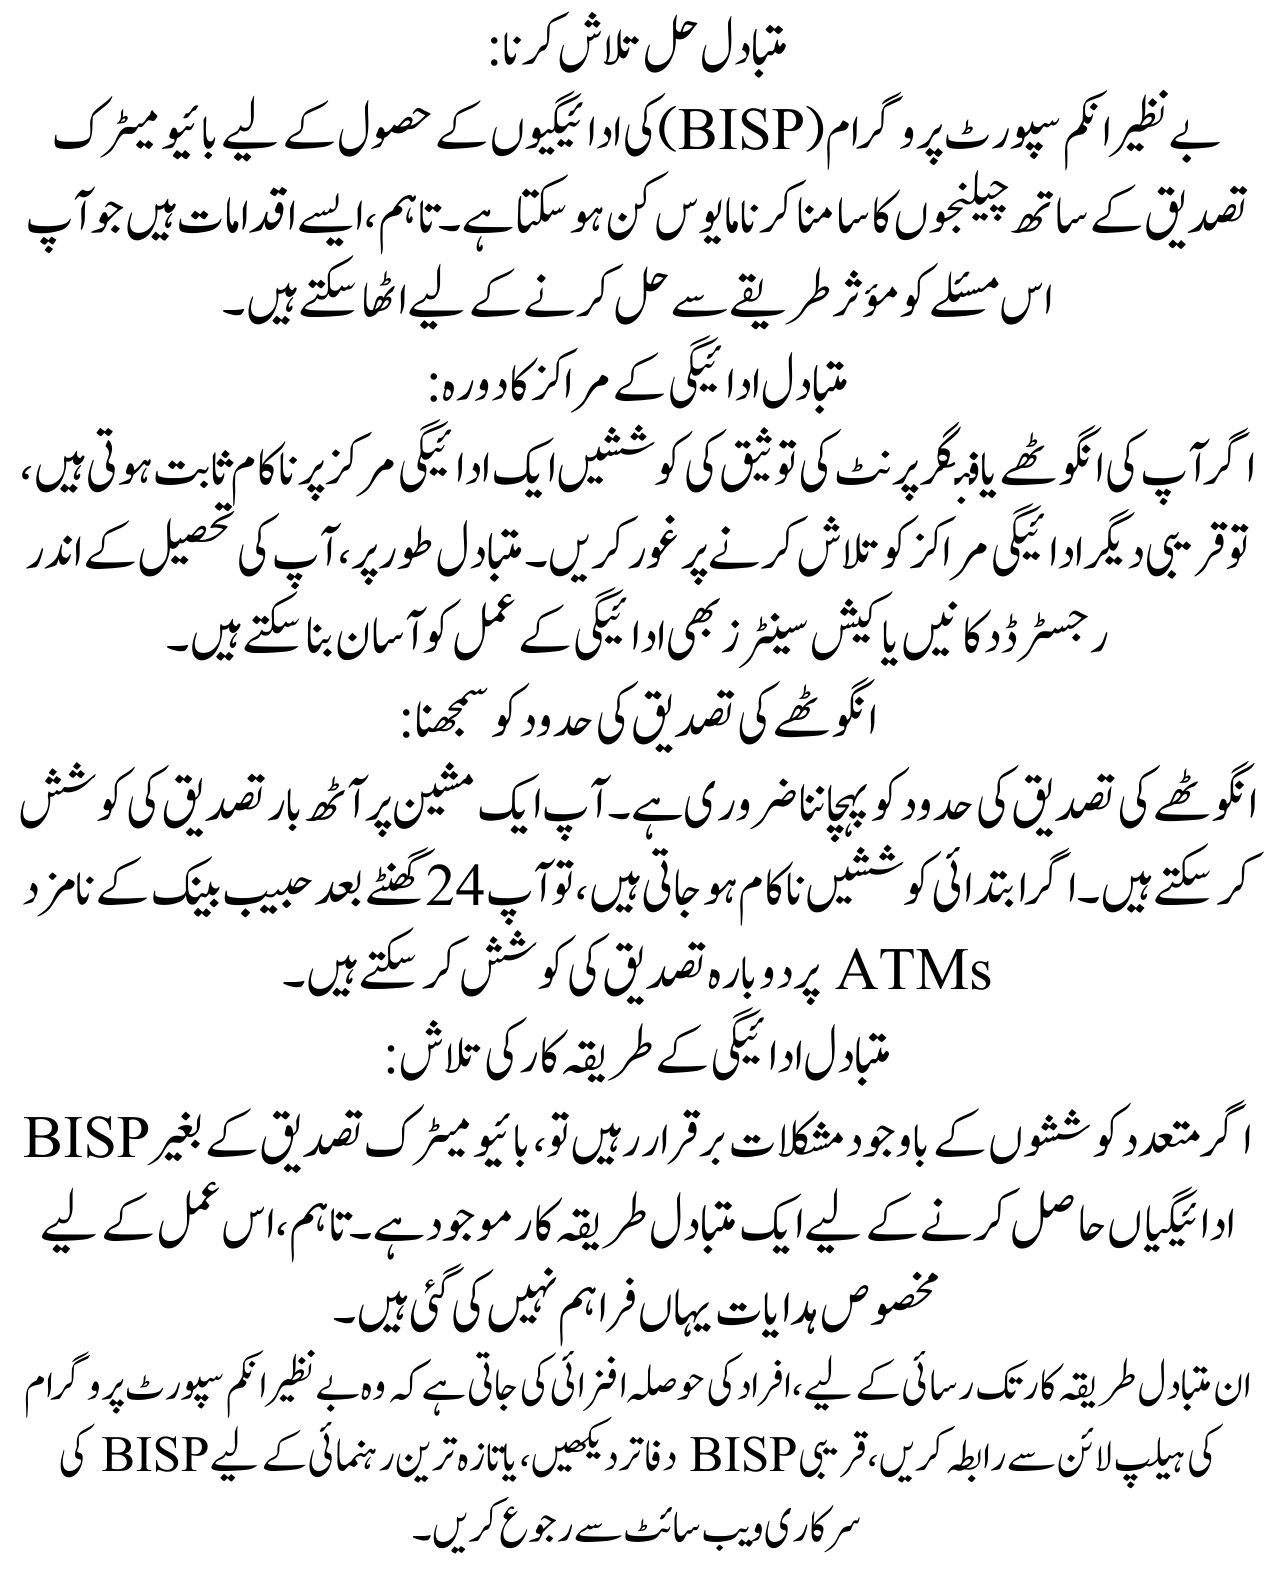 Latest News: BISP Payment Without Biometric Verification BISP Payment Check